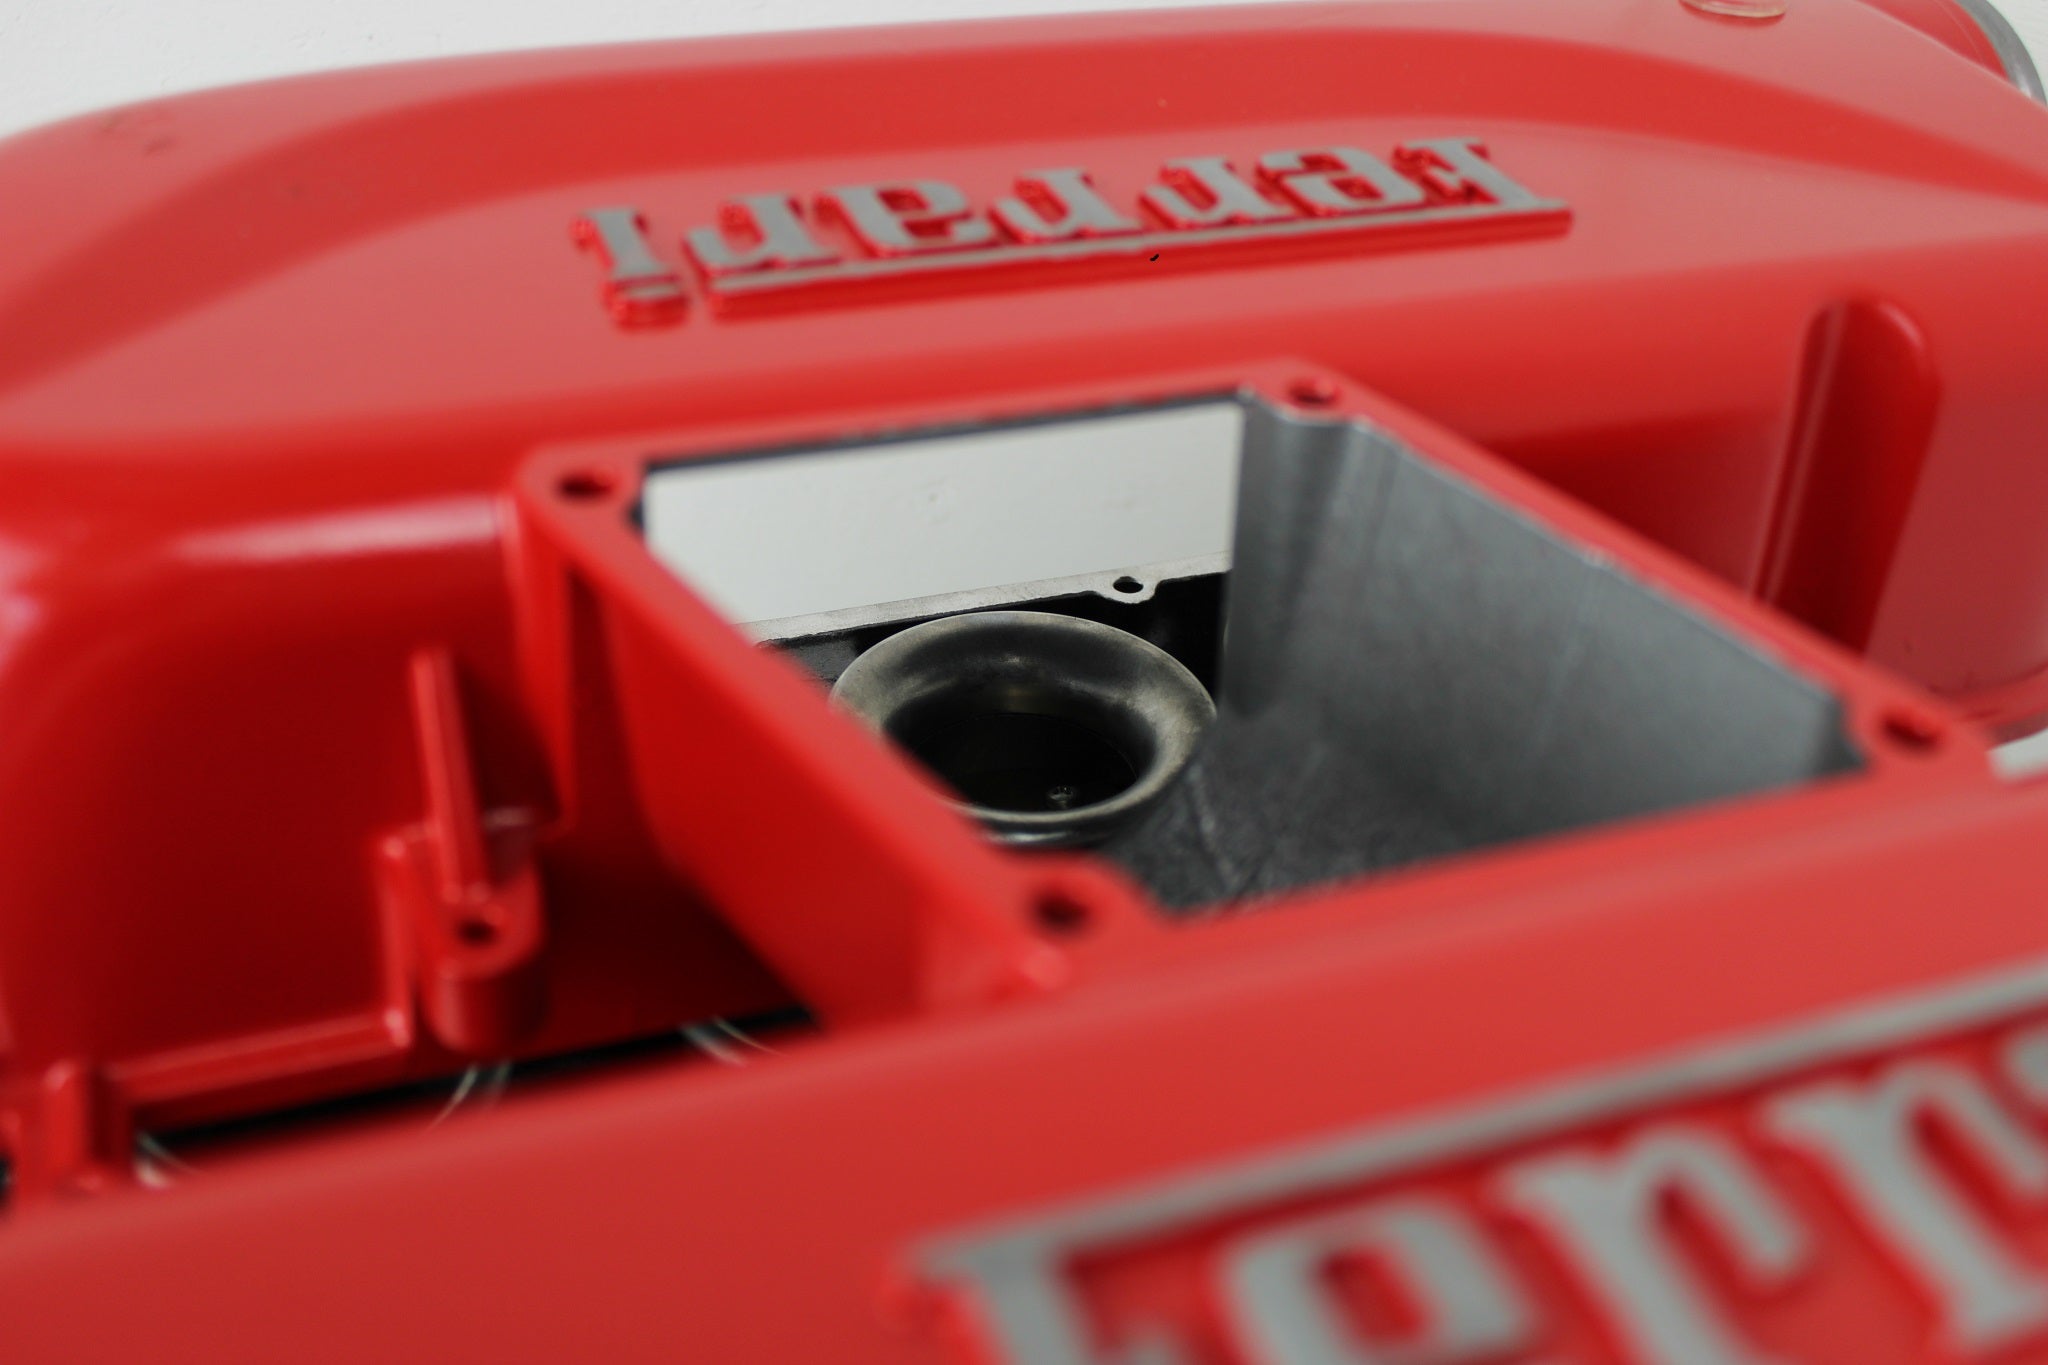 Close-up view of a Ferrari intake manifold table, the Ferrari logo displayed on both sides.